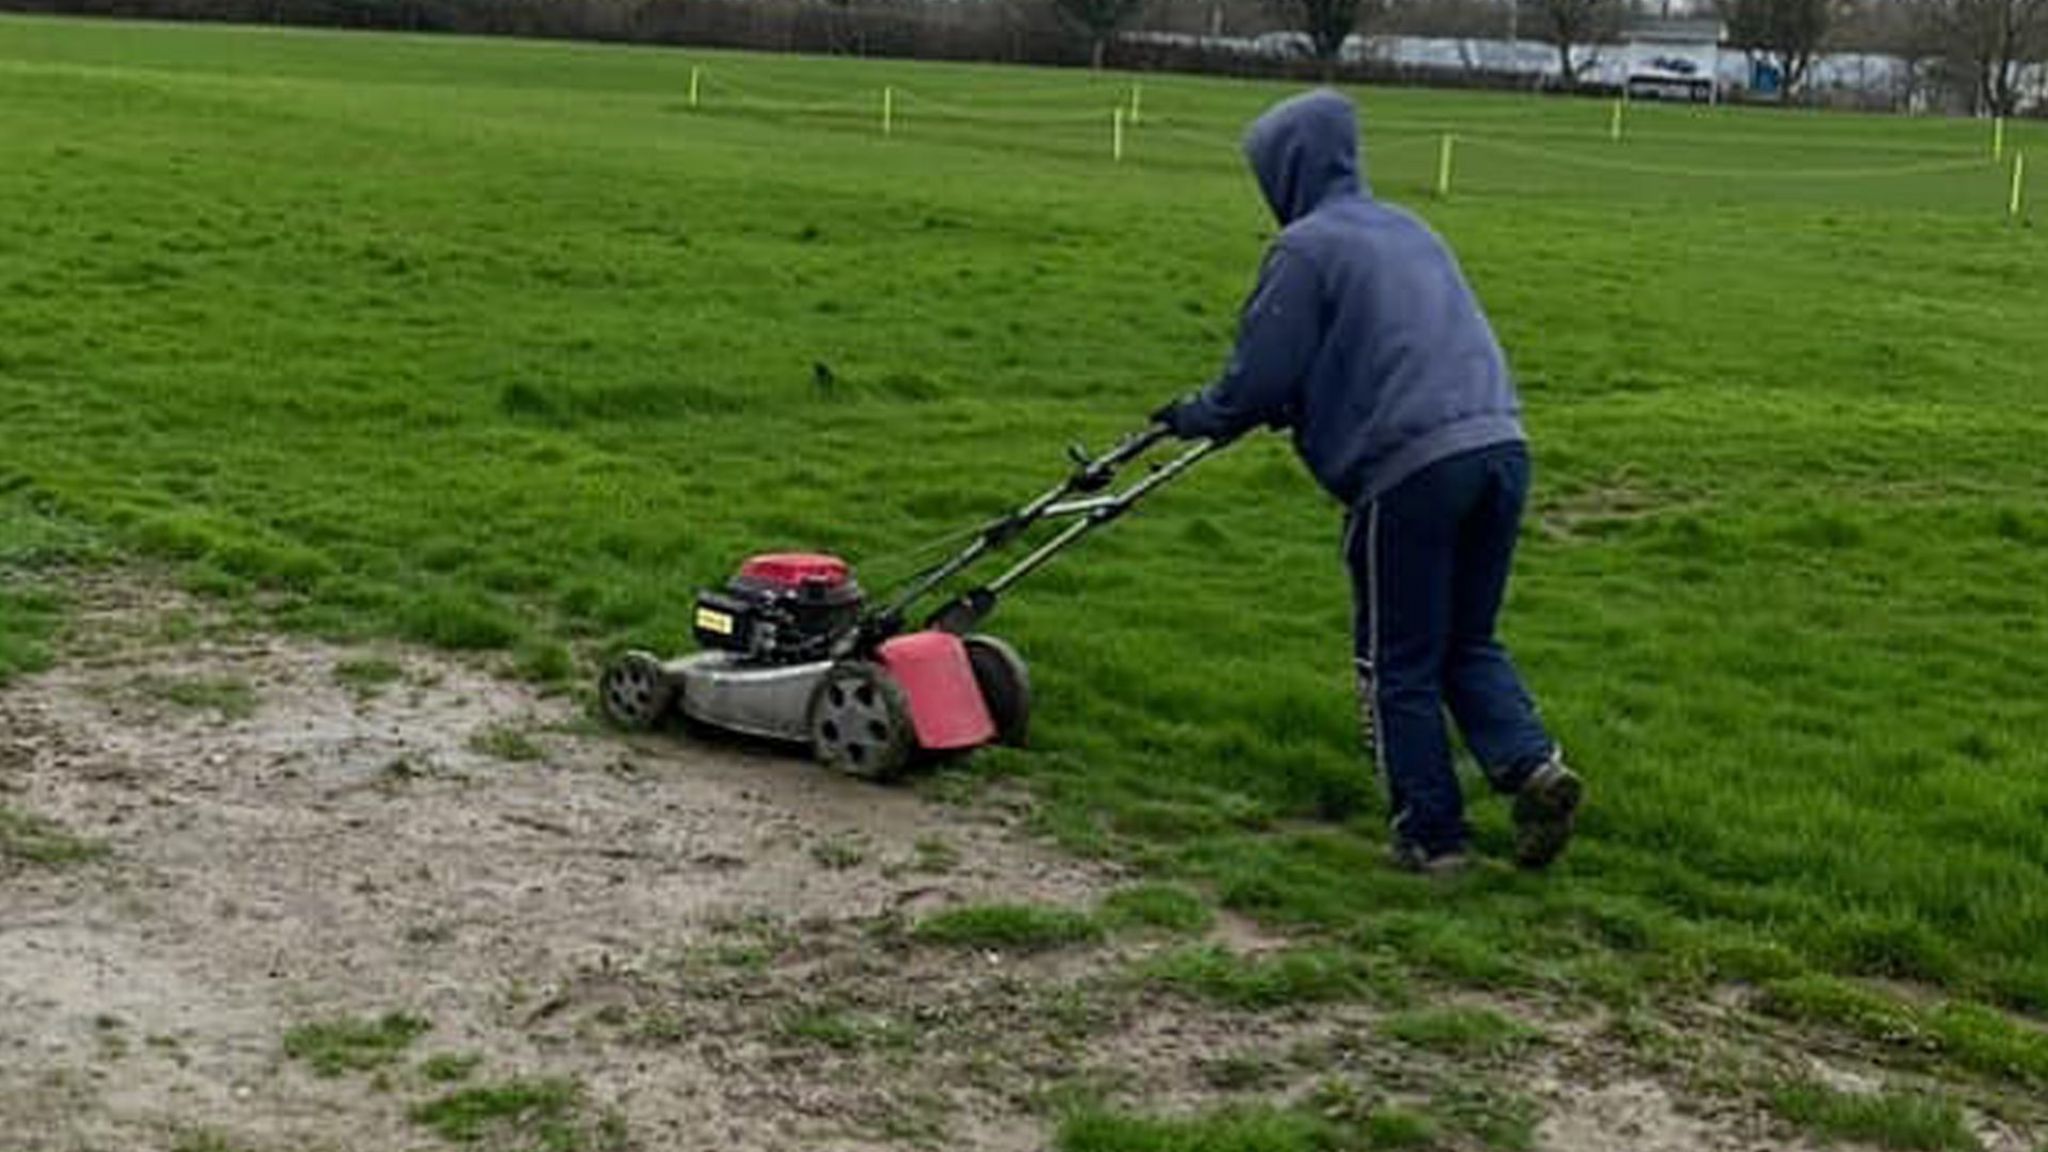 A man in a blue hoodie pushes a mower on the outfield, which is partly grassy but with a large muddy bald patch